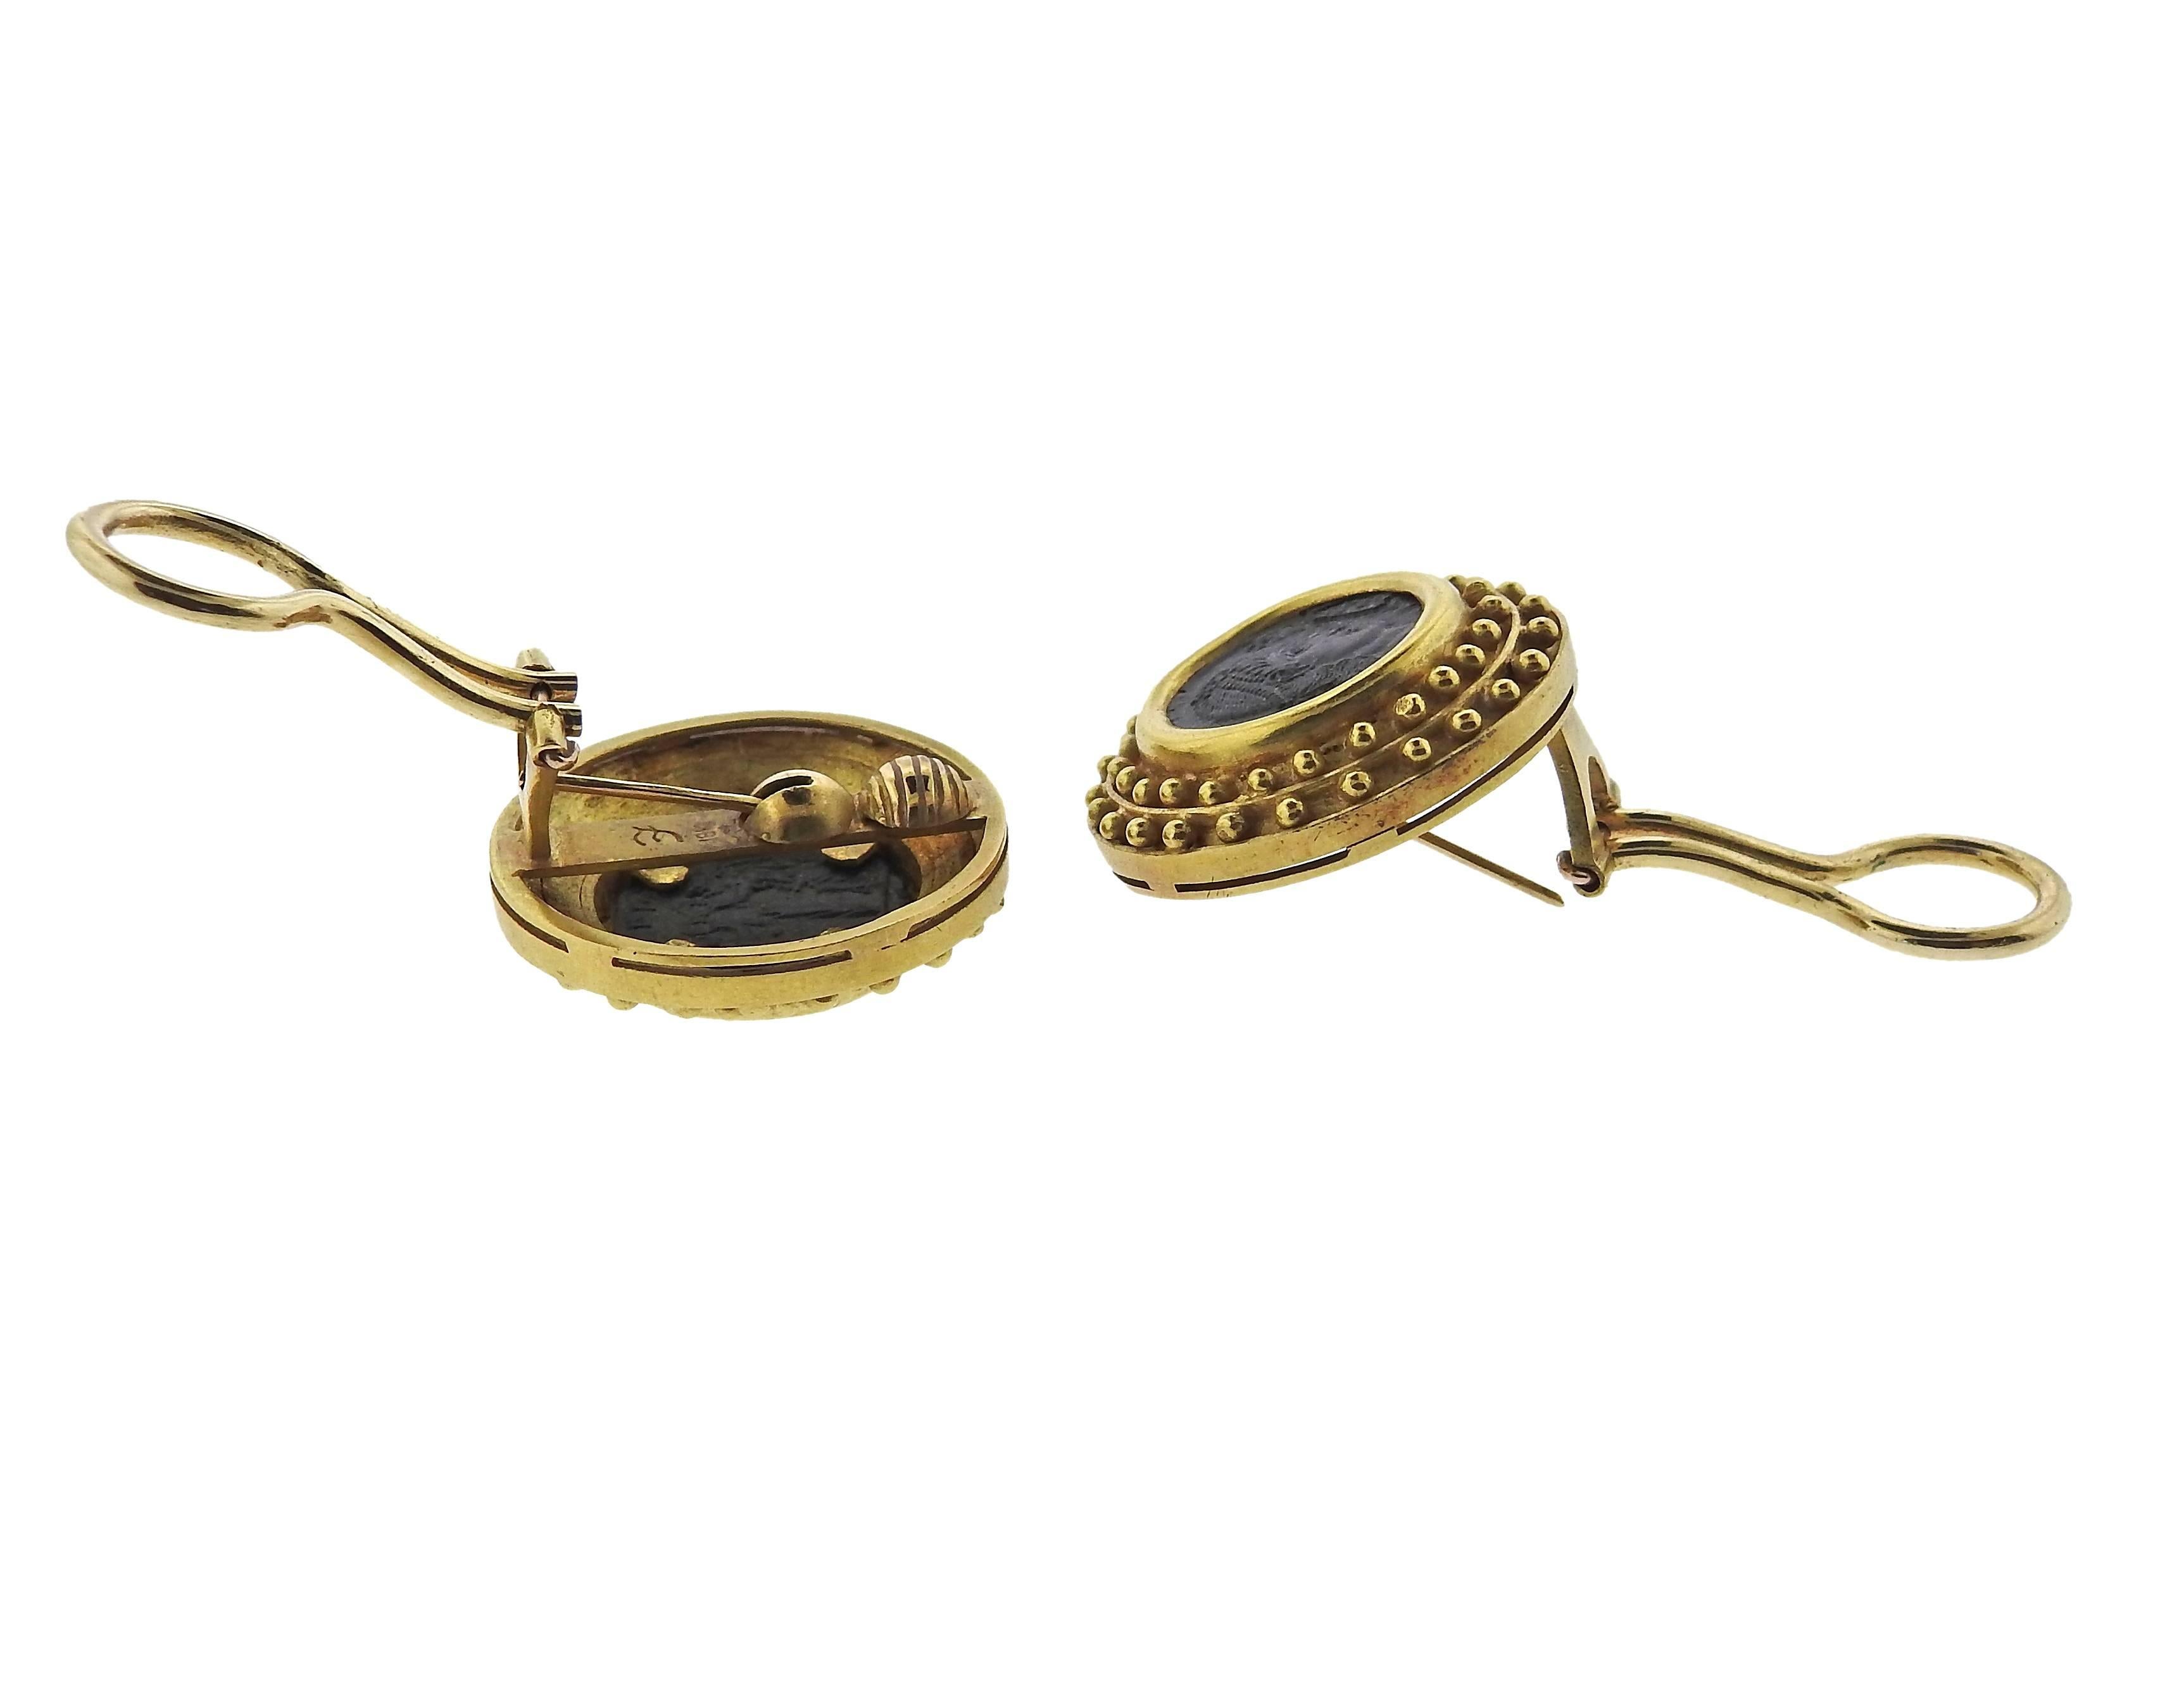 Pair of 18k gold earrings, crafted by Elizabeth Locke, set with ancient coins. Earrings measure 25mm in diameter , collapsible posts . Weight - 27.6 grams. Marked with Locke mark and 18k. 